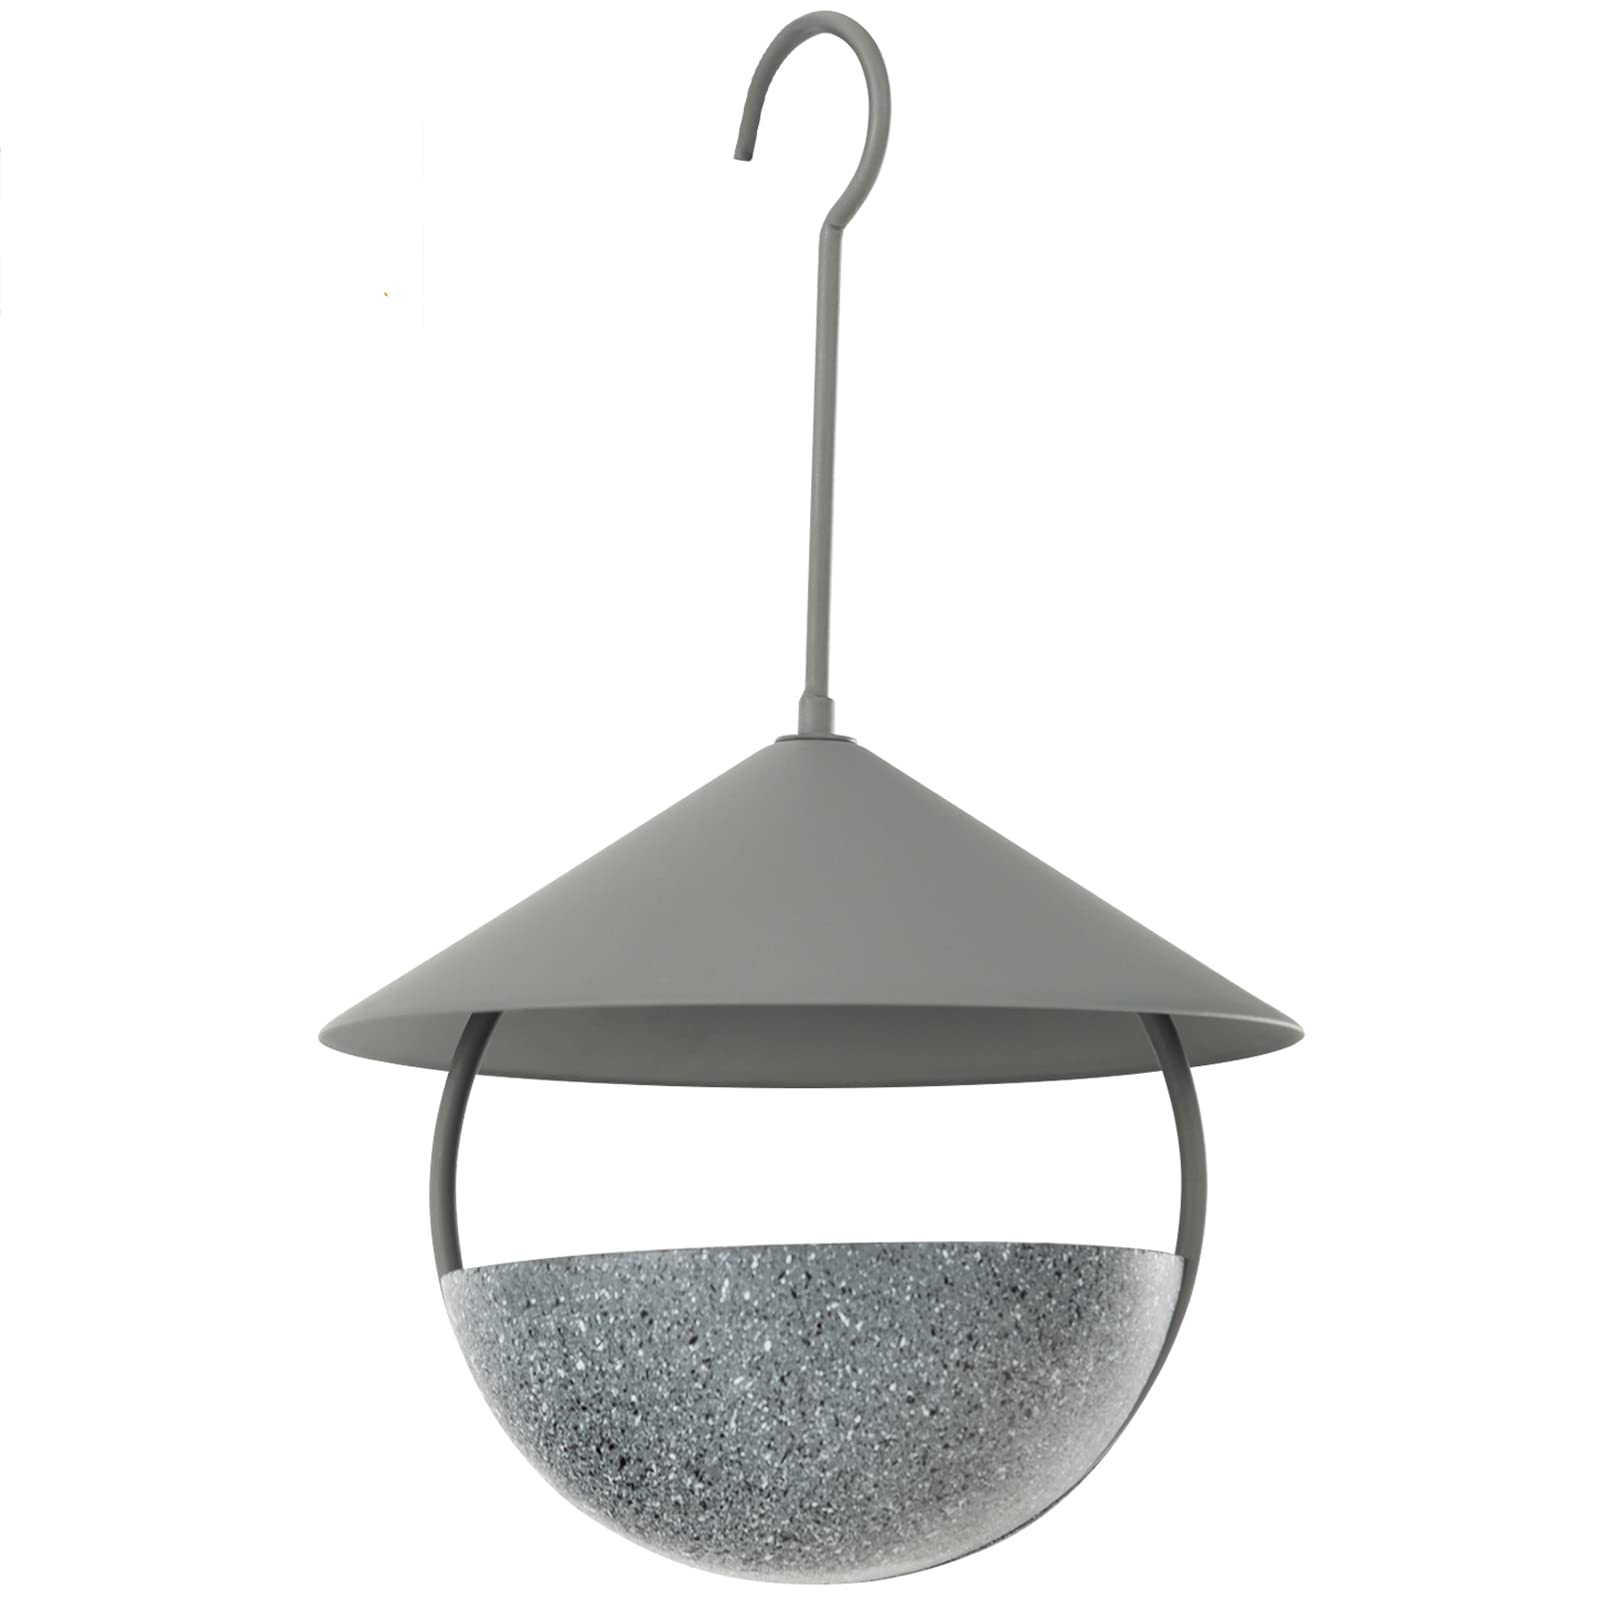 Giantex Bird Feeder, Hanging Wild Bird Feeder Bath with Removable Resin Feed Bowl and Waterproof Metal Roof